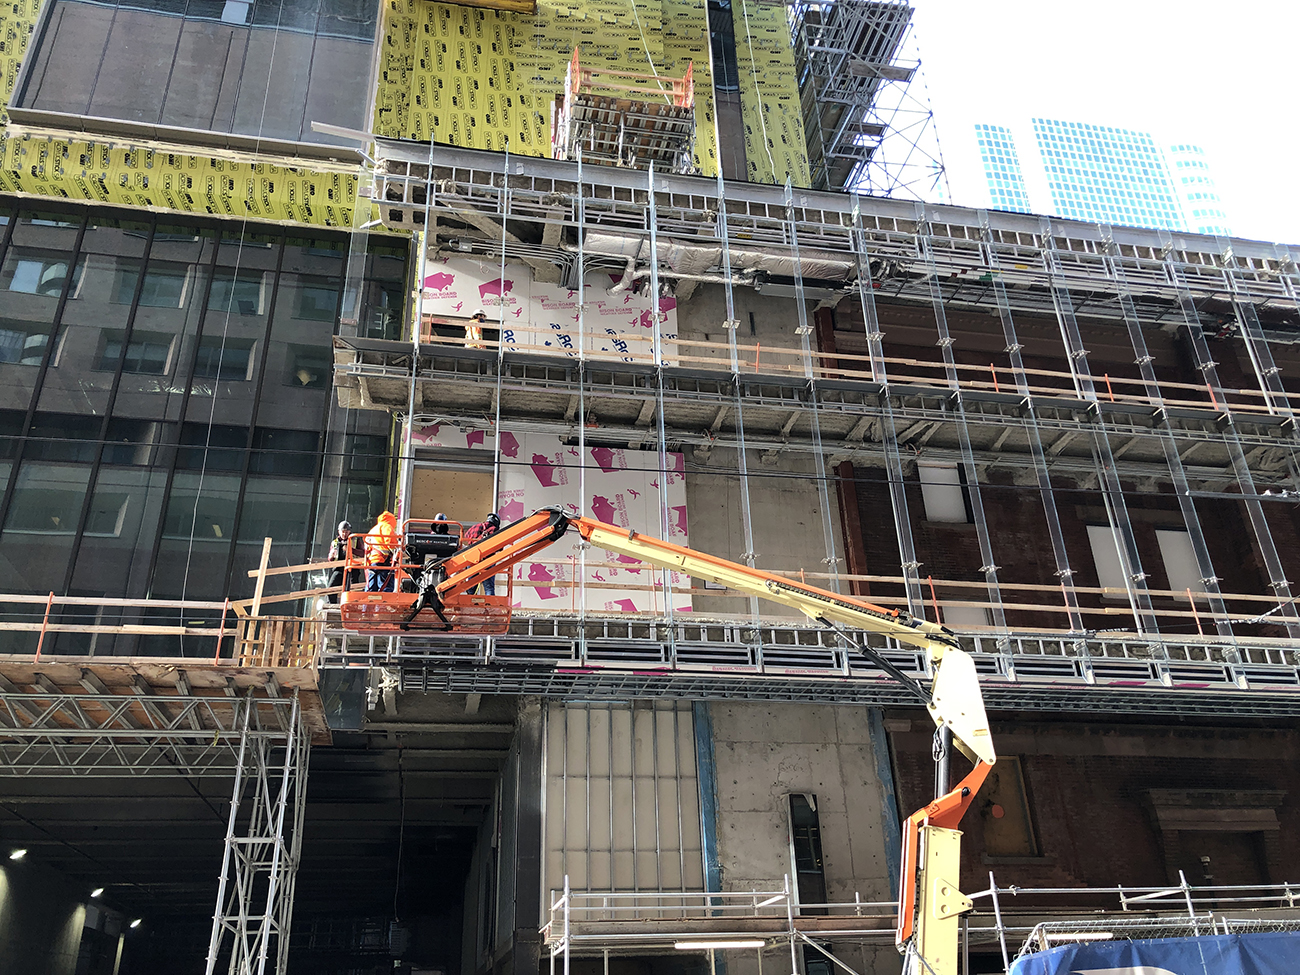 Despite COVID-19 delays, glass fabricator InKan helped complete the revitalization of Massey Hall, an original concert hall from the 1800’s, located in Toronto, Canada.